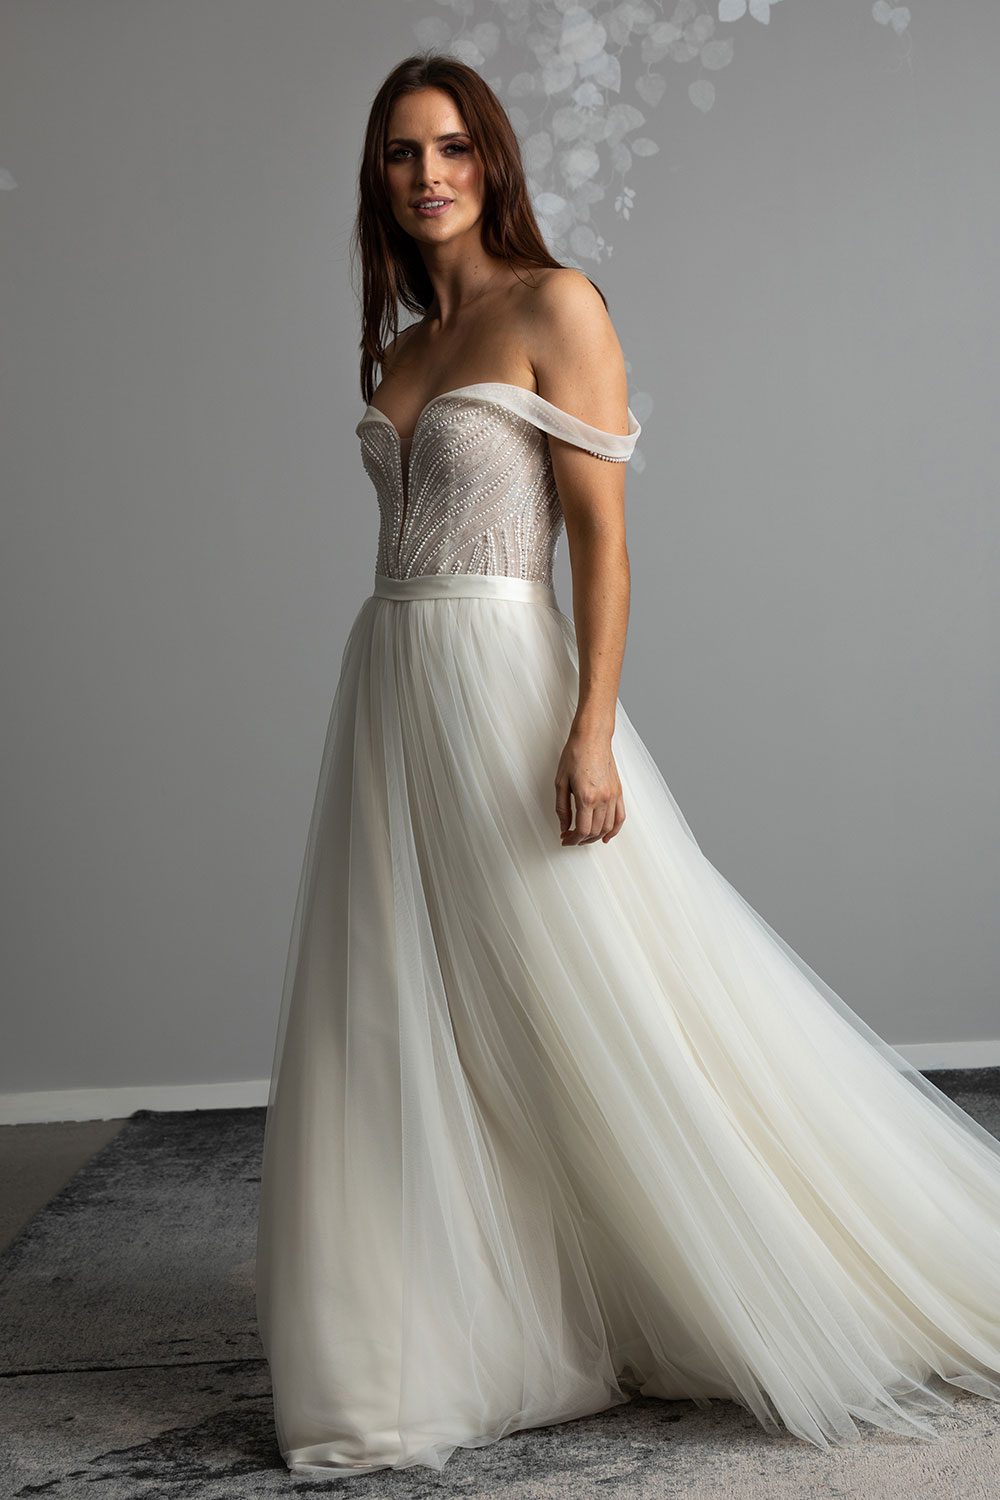 Aroha Wedding gown from Vinka Design - Beautiful & intricate pearl beading is hand-appliqued along this wedding gown’s structured, boned bodice. Delicate off-shoulder straps are complemented by the sweetheart neckline. - 3 quarter view of model showing the skirt made of soft dreamy tulle